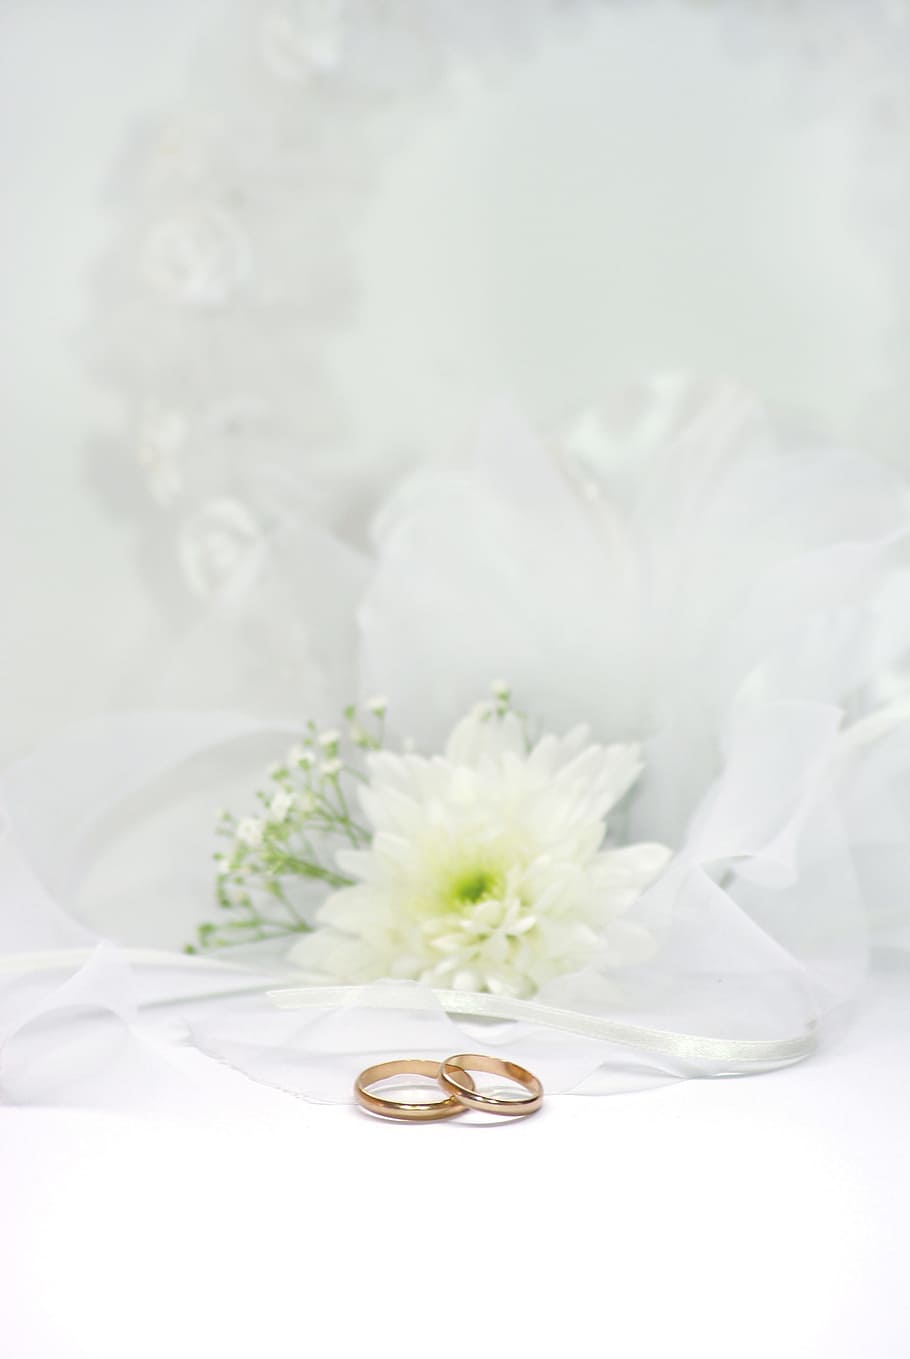 two gold-colored rings, wedding, marry, jewellery, before, romance